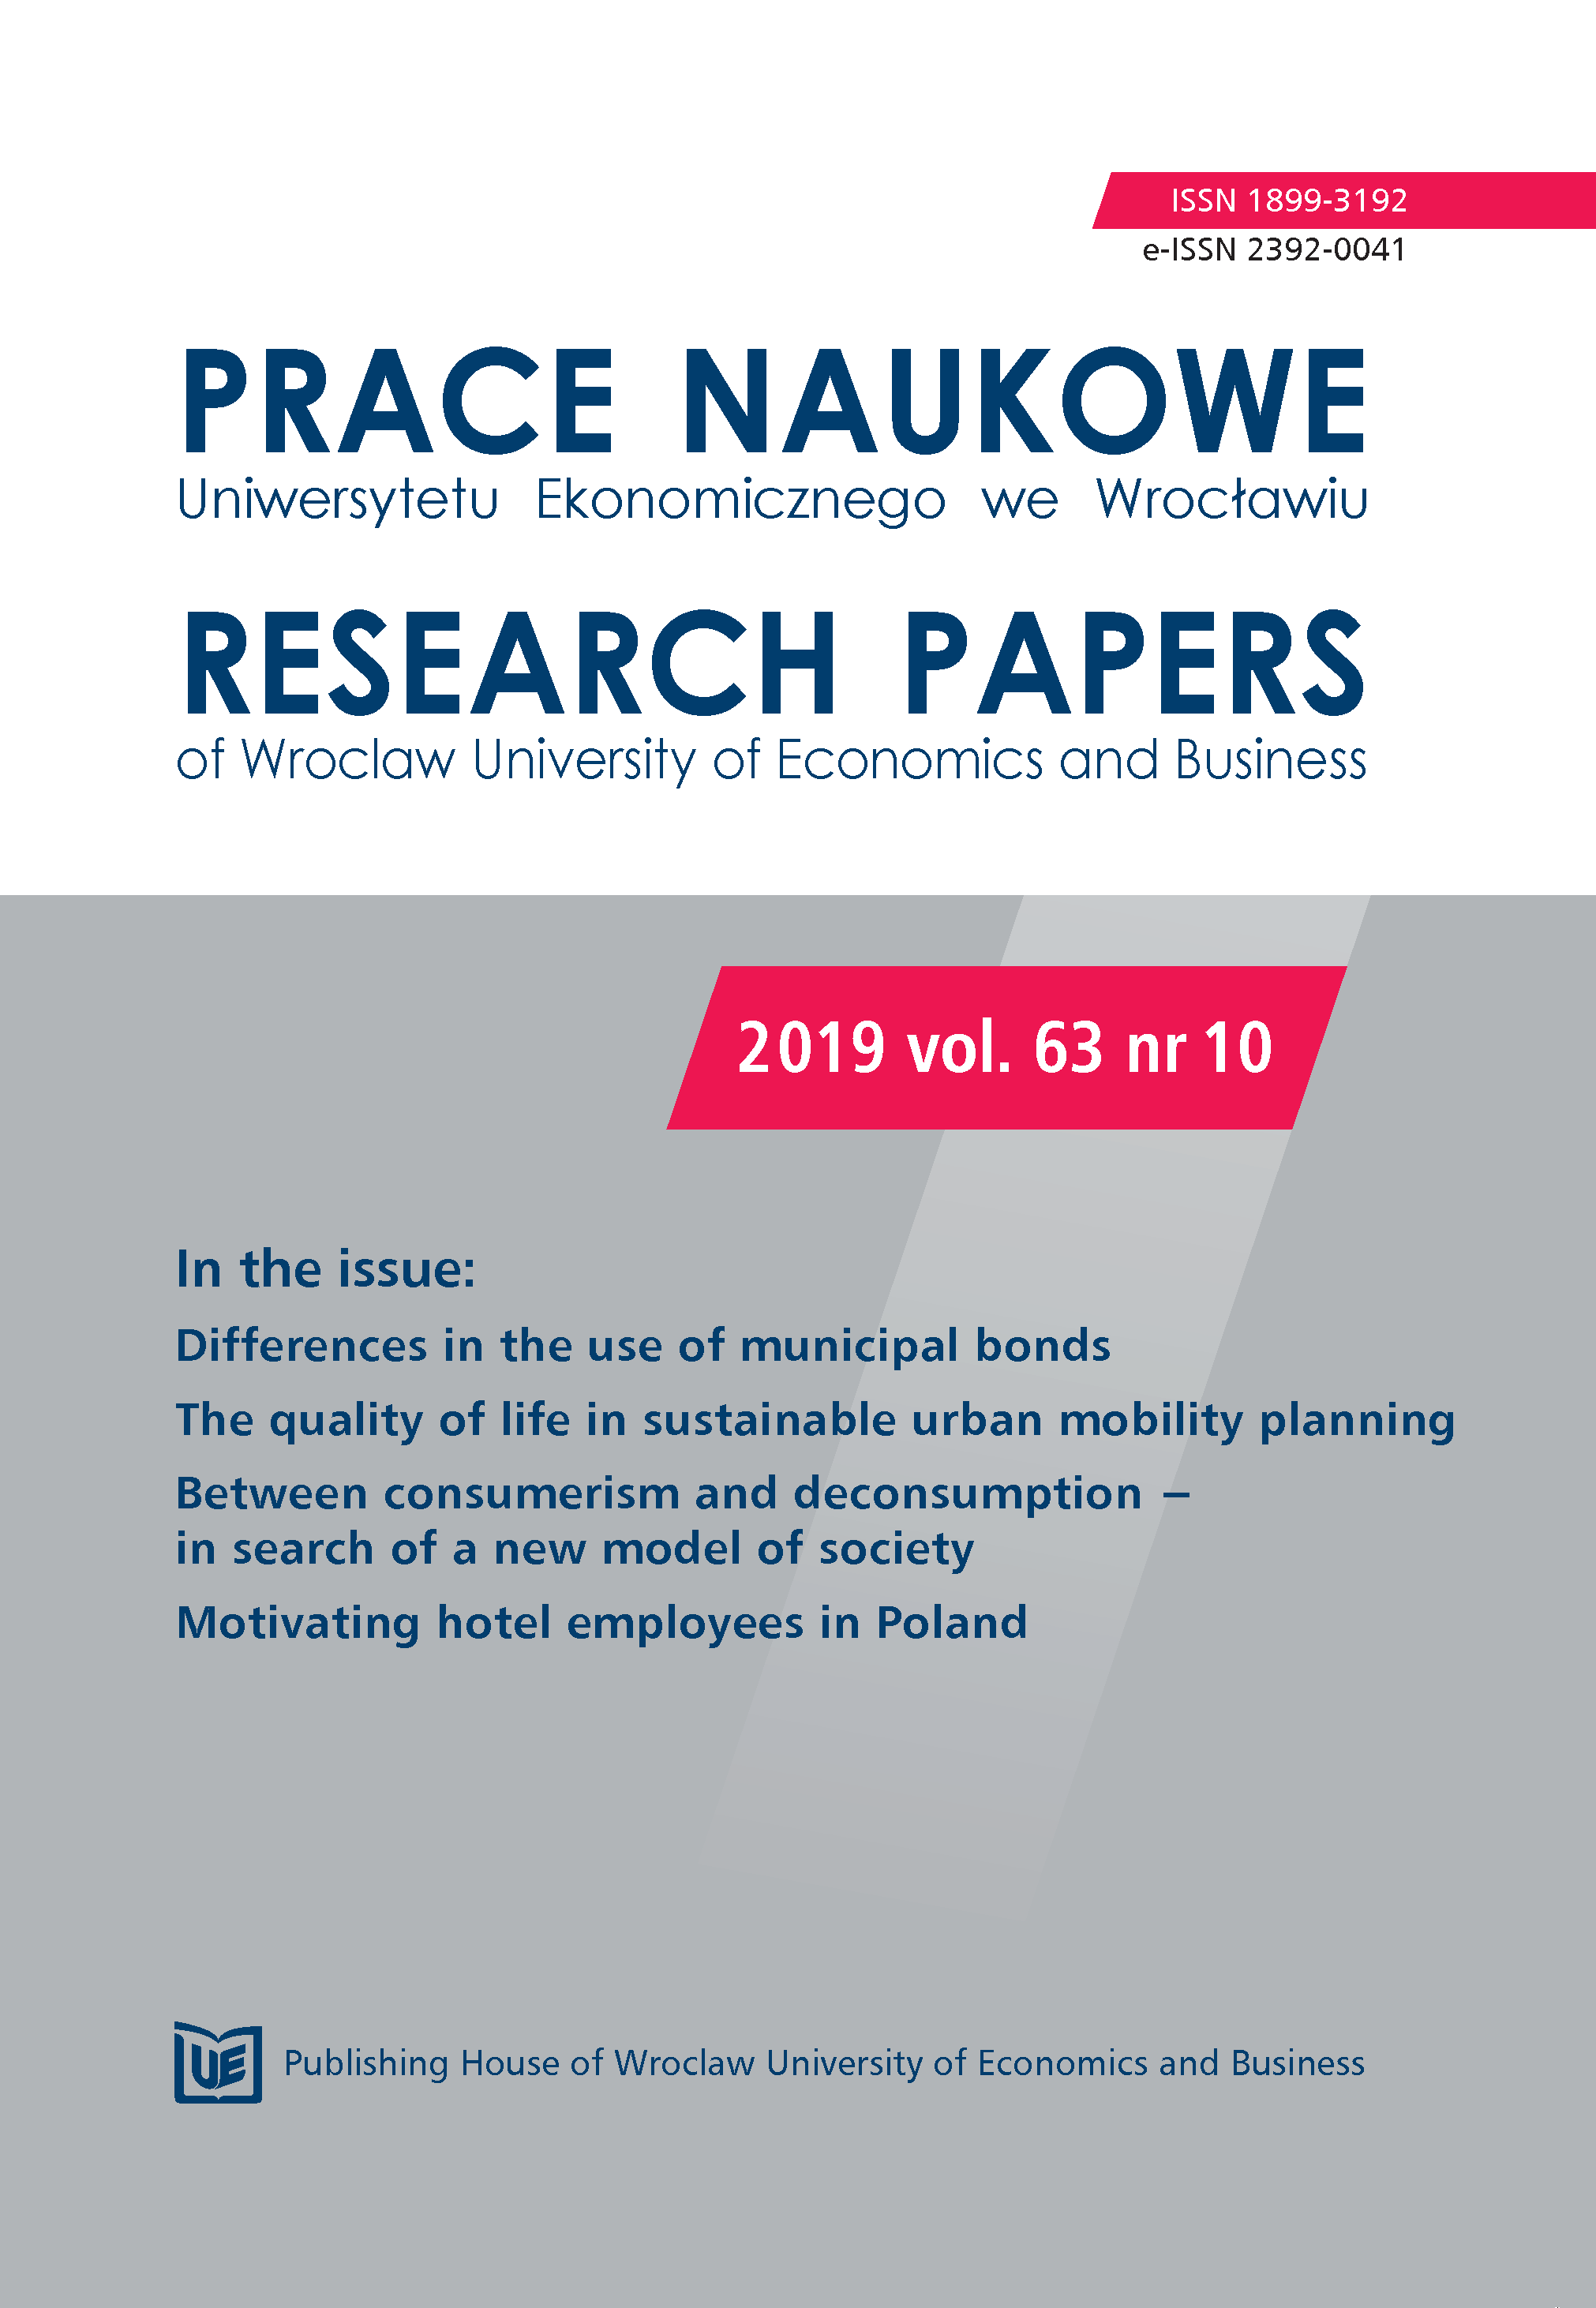 Differences in the use of municipal bonds by rural municipalities across the Polish territory Cover Image